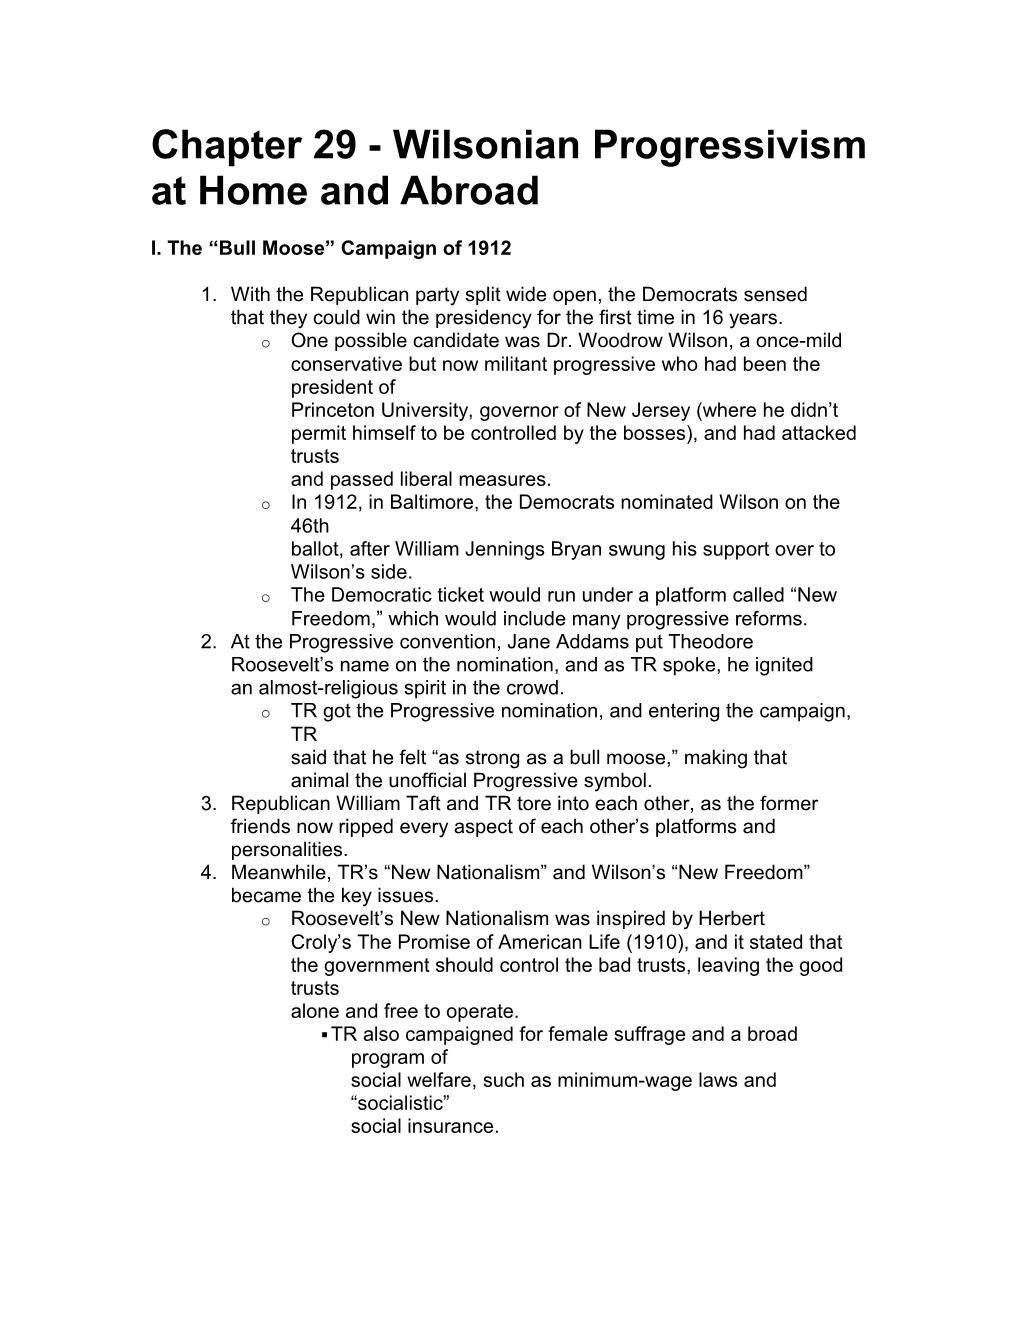 Chapter 29 - Wilsonian Progressivism at Home and Abroad